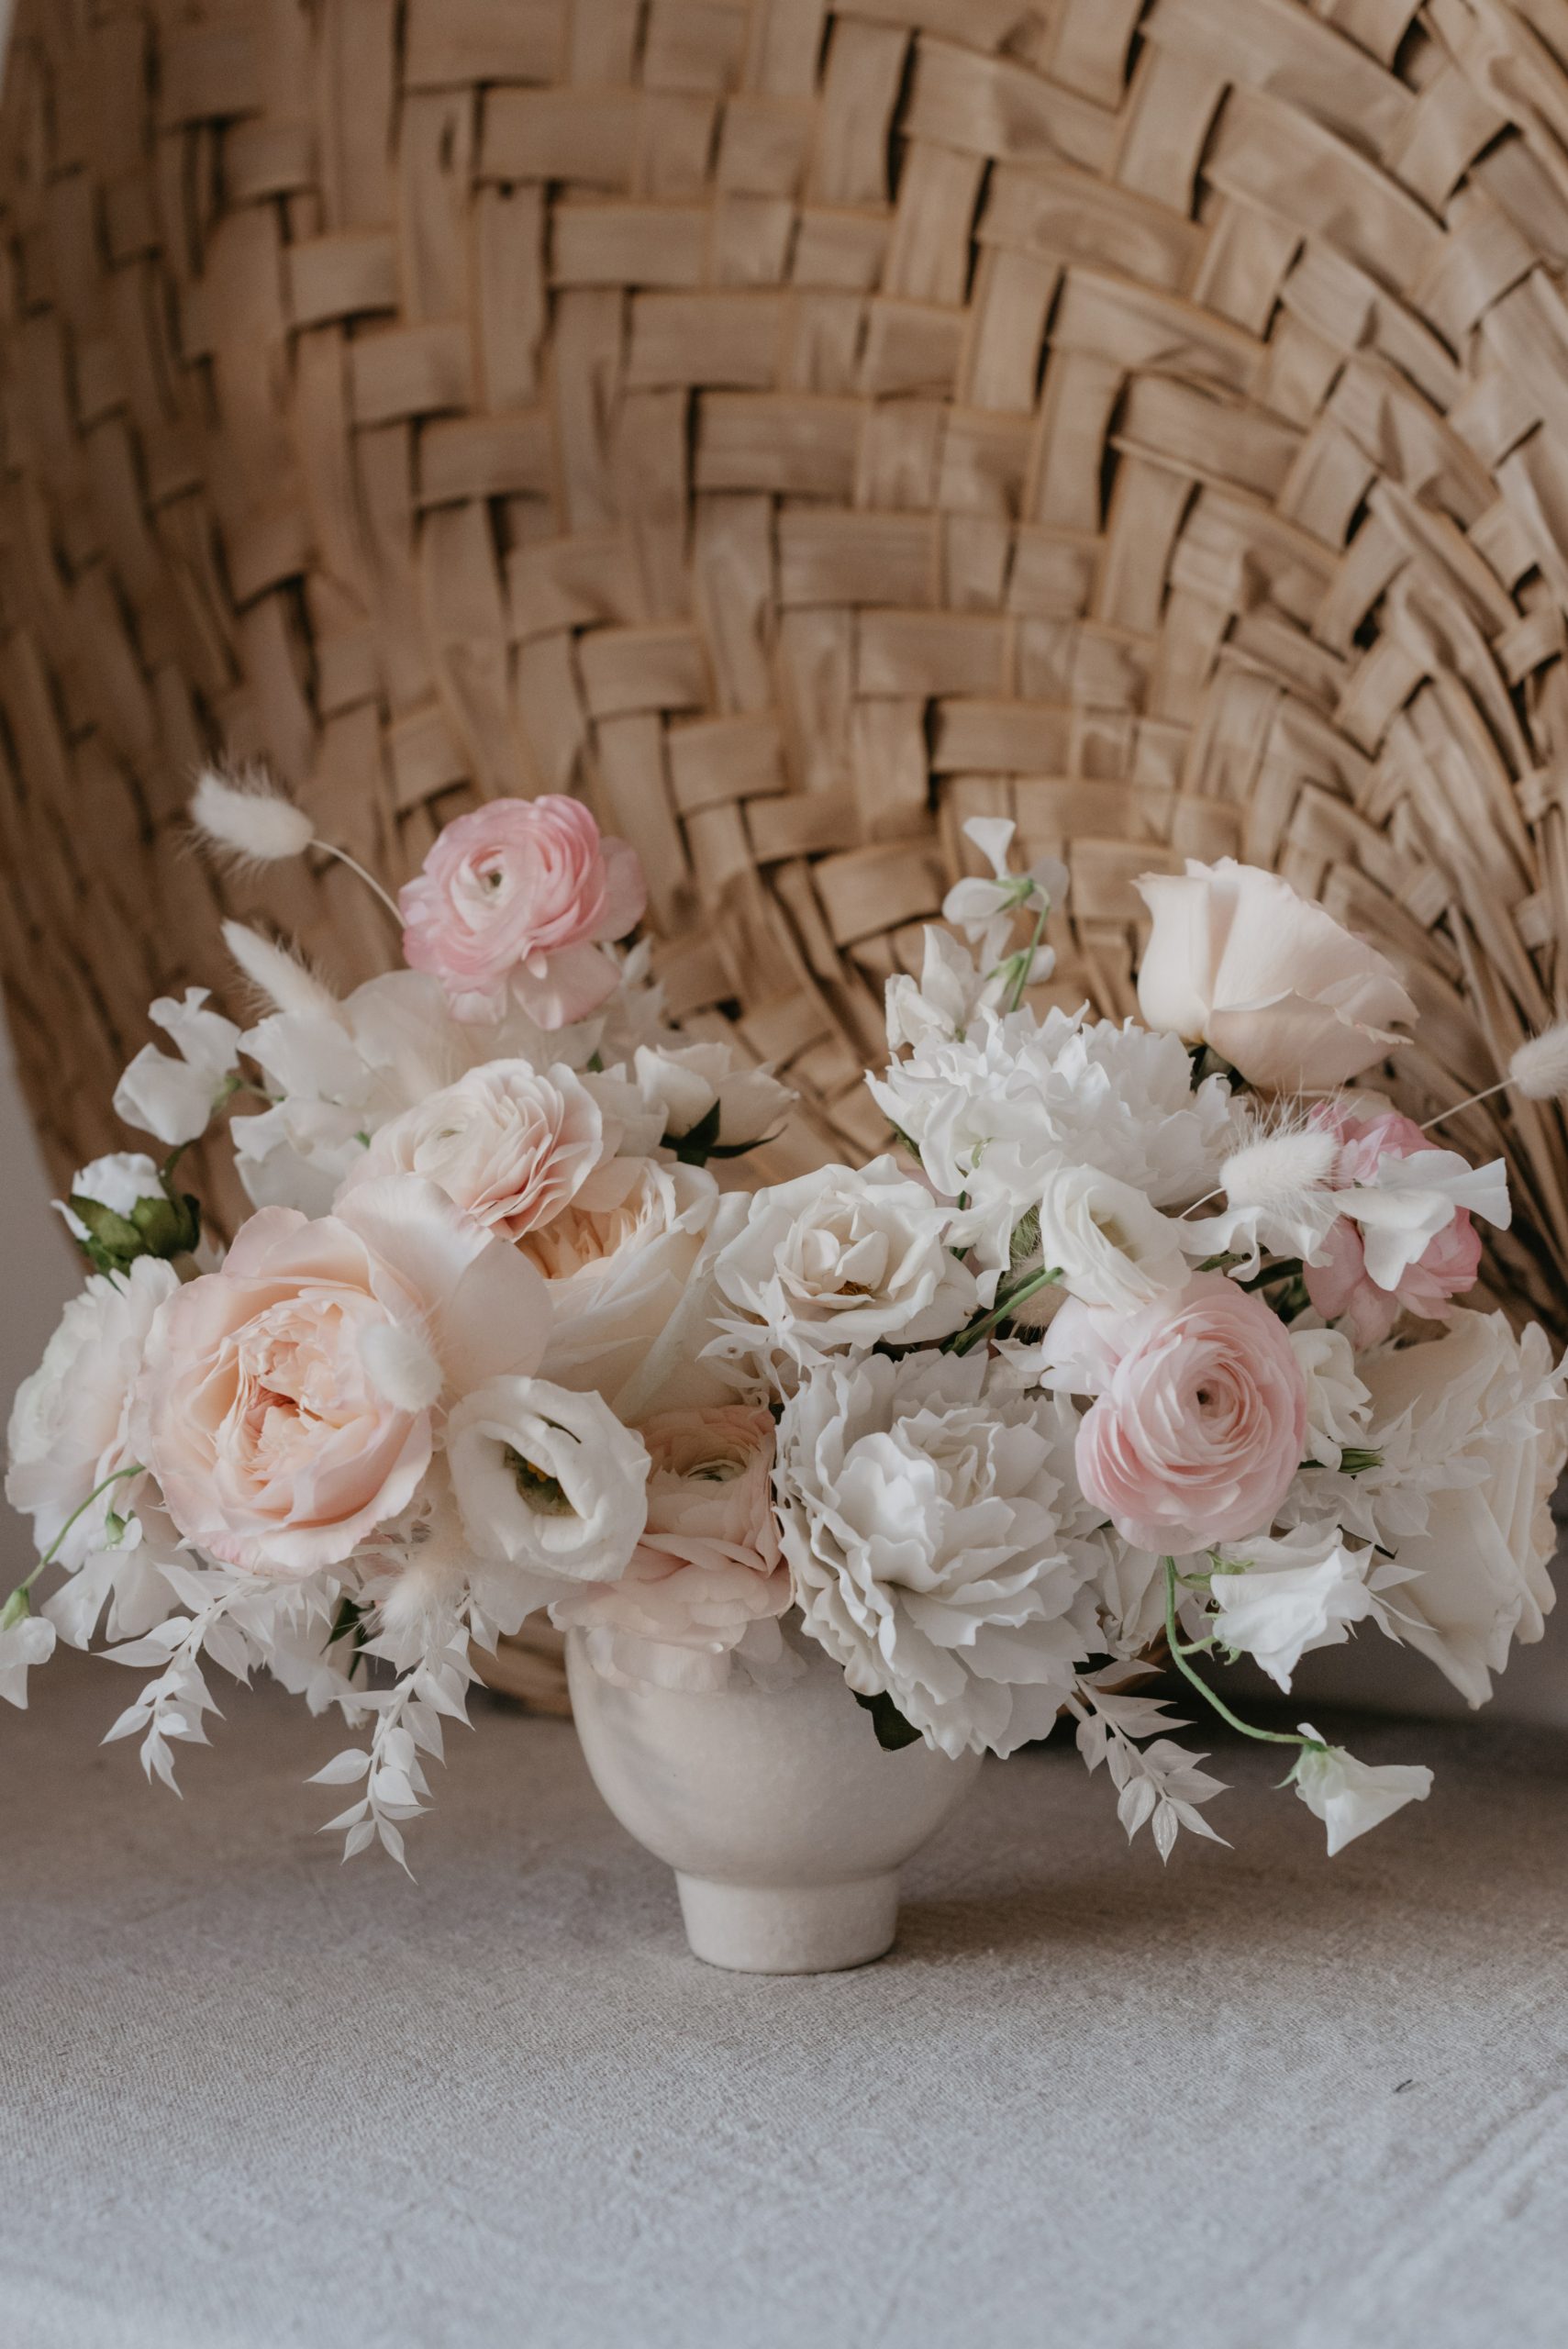 A beautiful front facing asymmetrical floral arrangement with a mixture of pastel tones in a white pedestal vase.